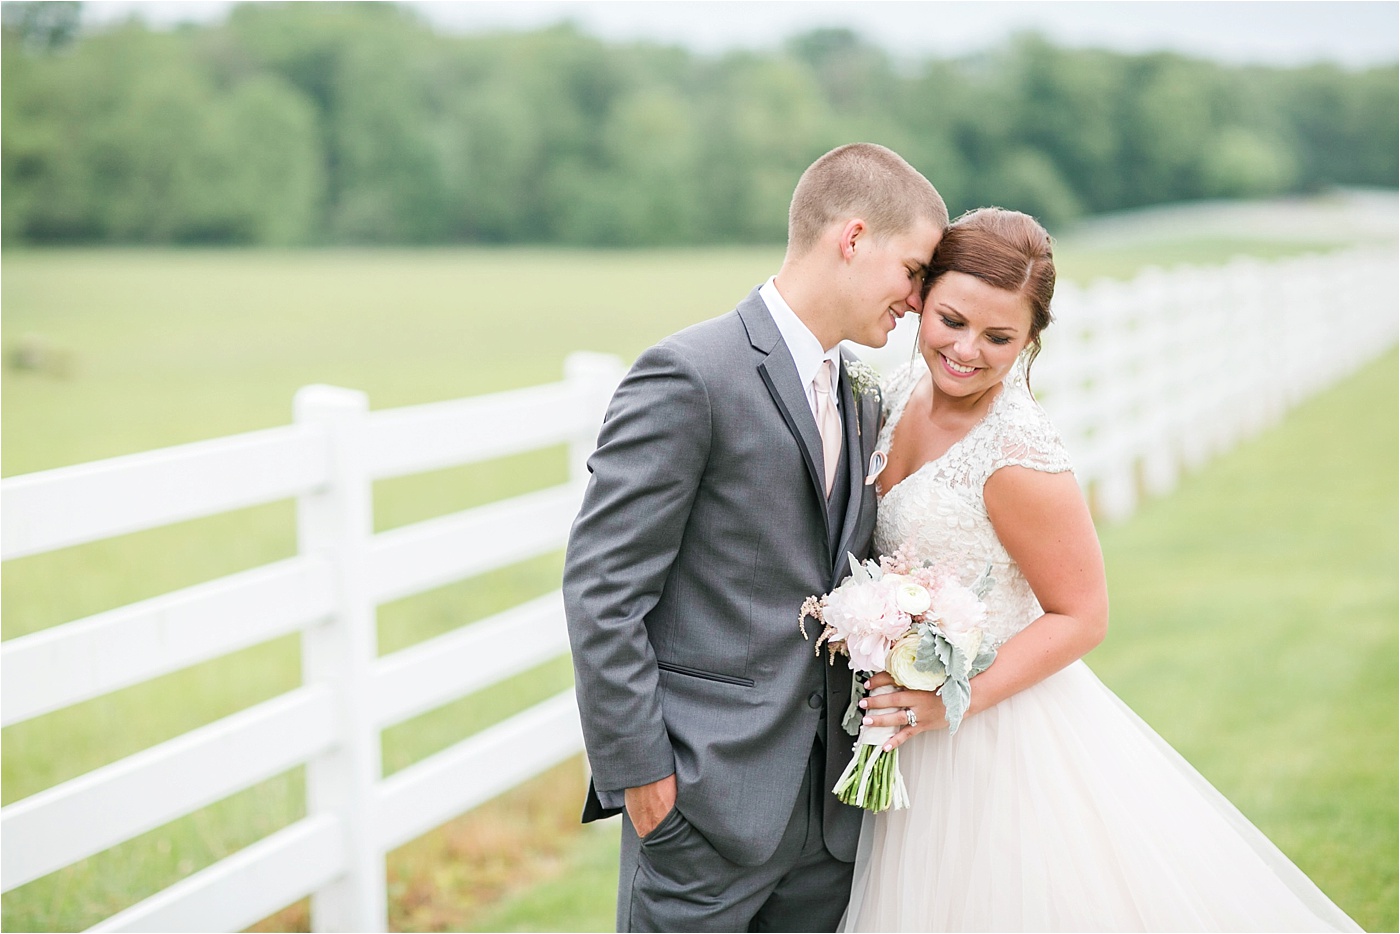 A Blush Outdoor wedding at Irongate Equestrian | KariMe Photography_0129